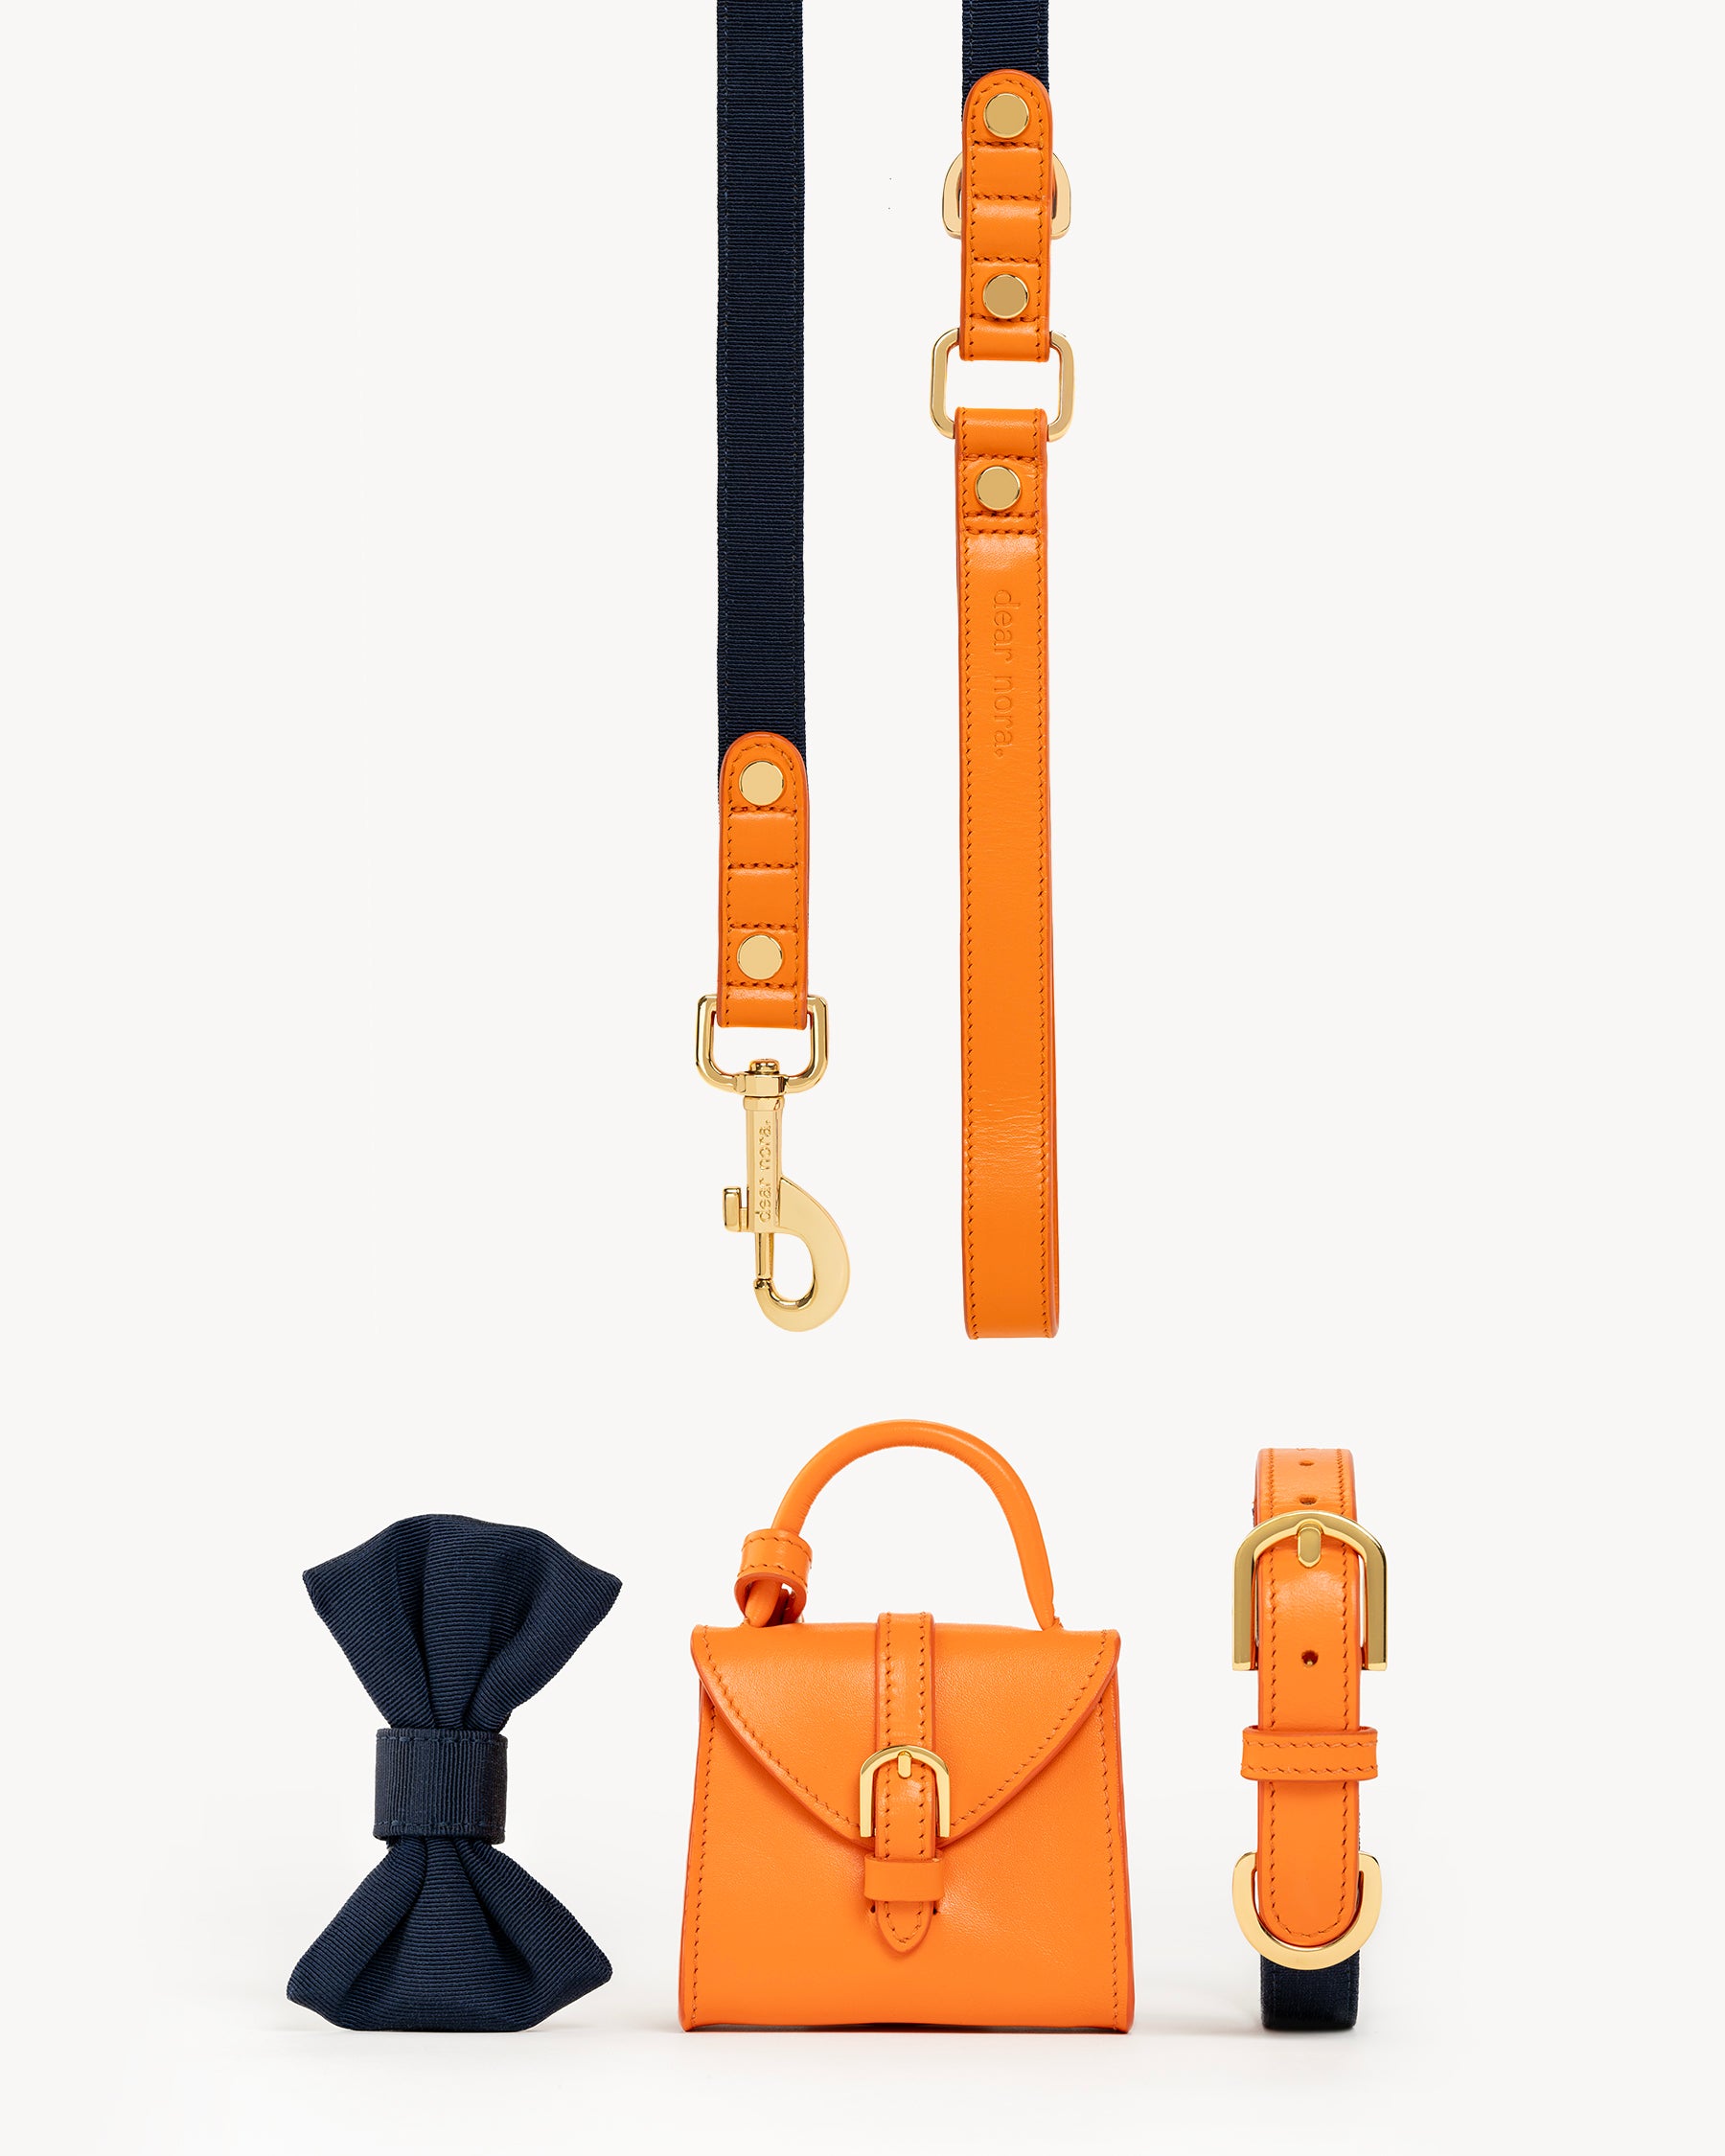 Dear Nora dog accessories set - orange leather and navy blue fabric – collar, leash, poop bag holder and bow